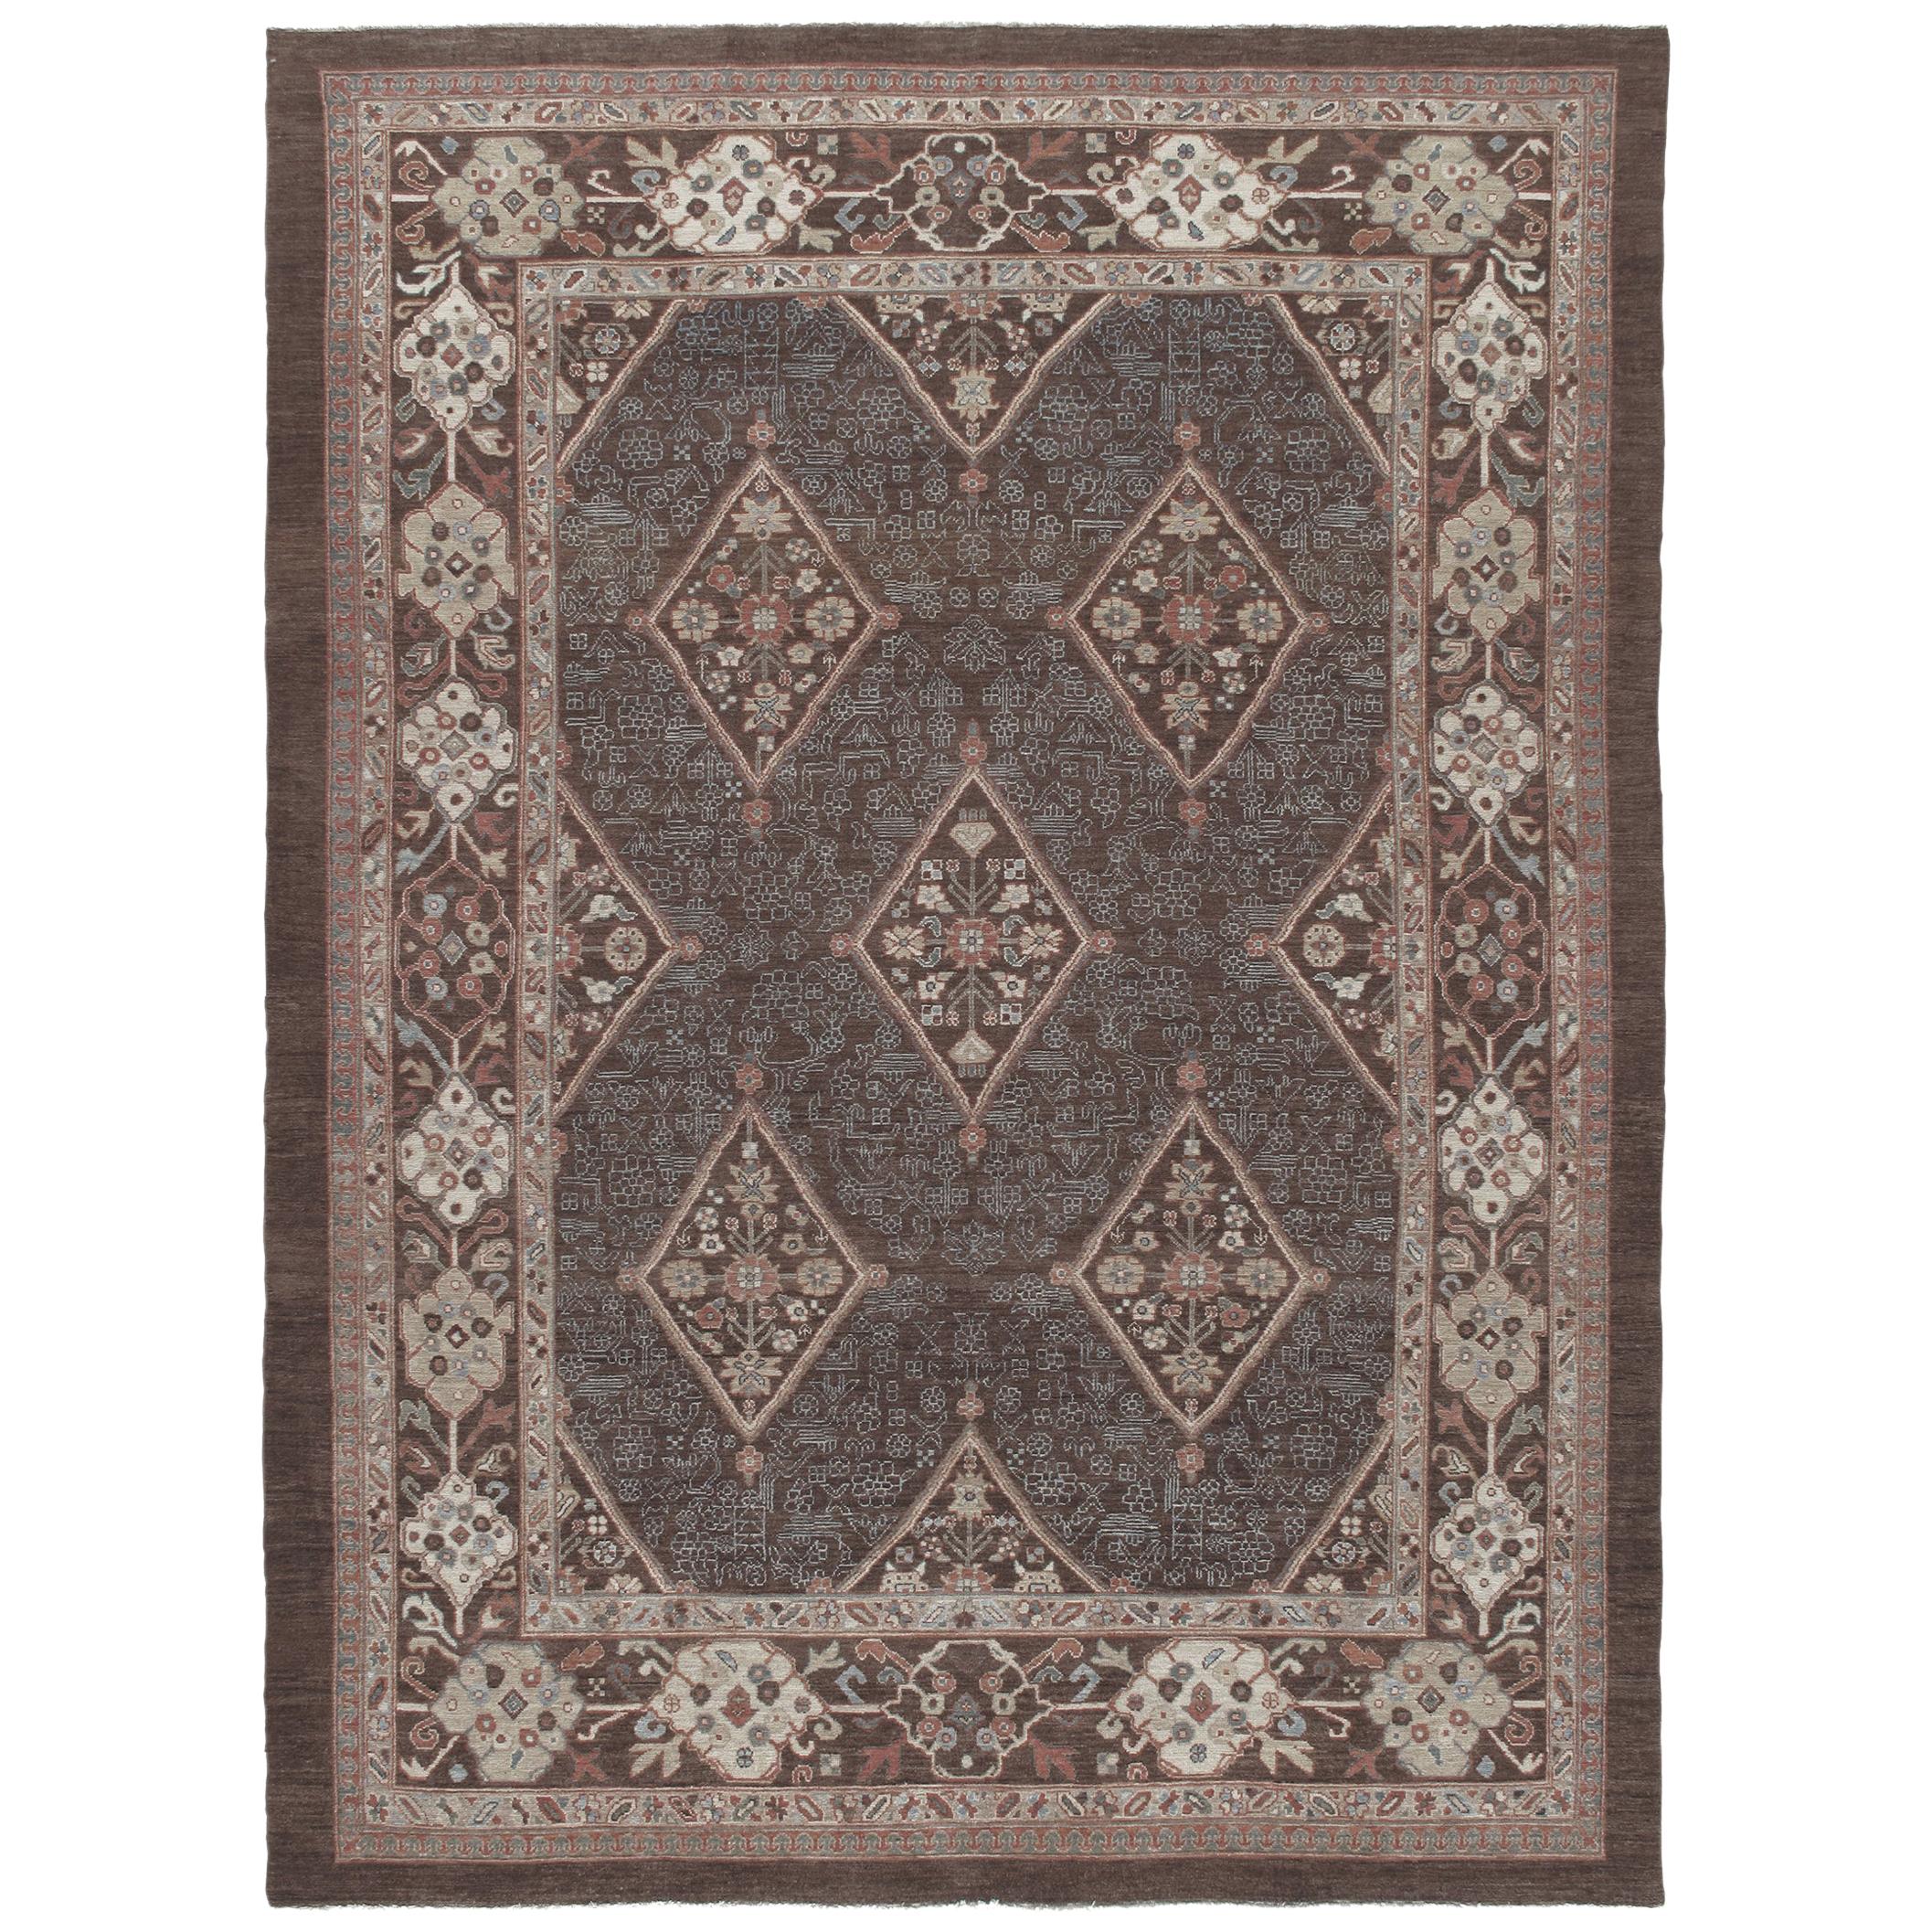 Persian Traditional Kurdish Handknotted Rug in Brown and Ivory Tones